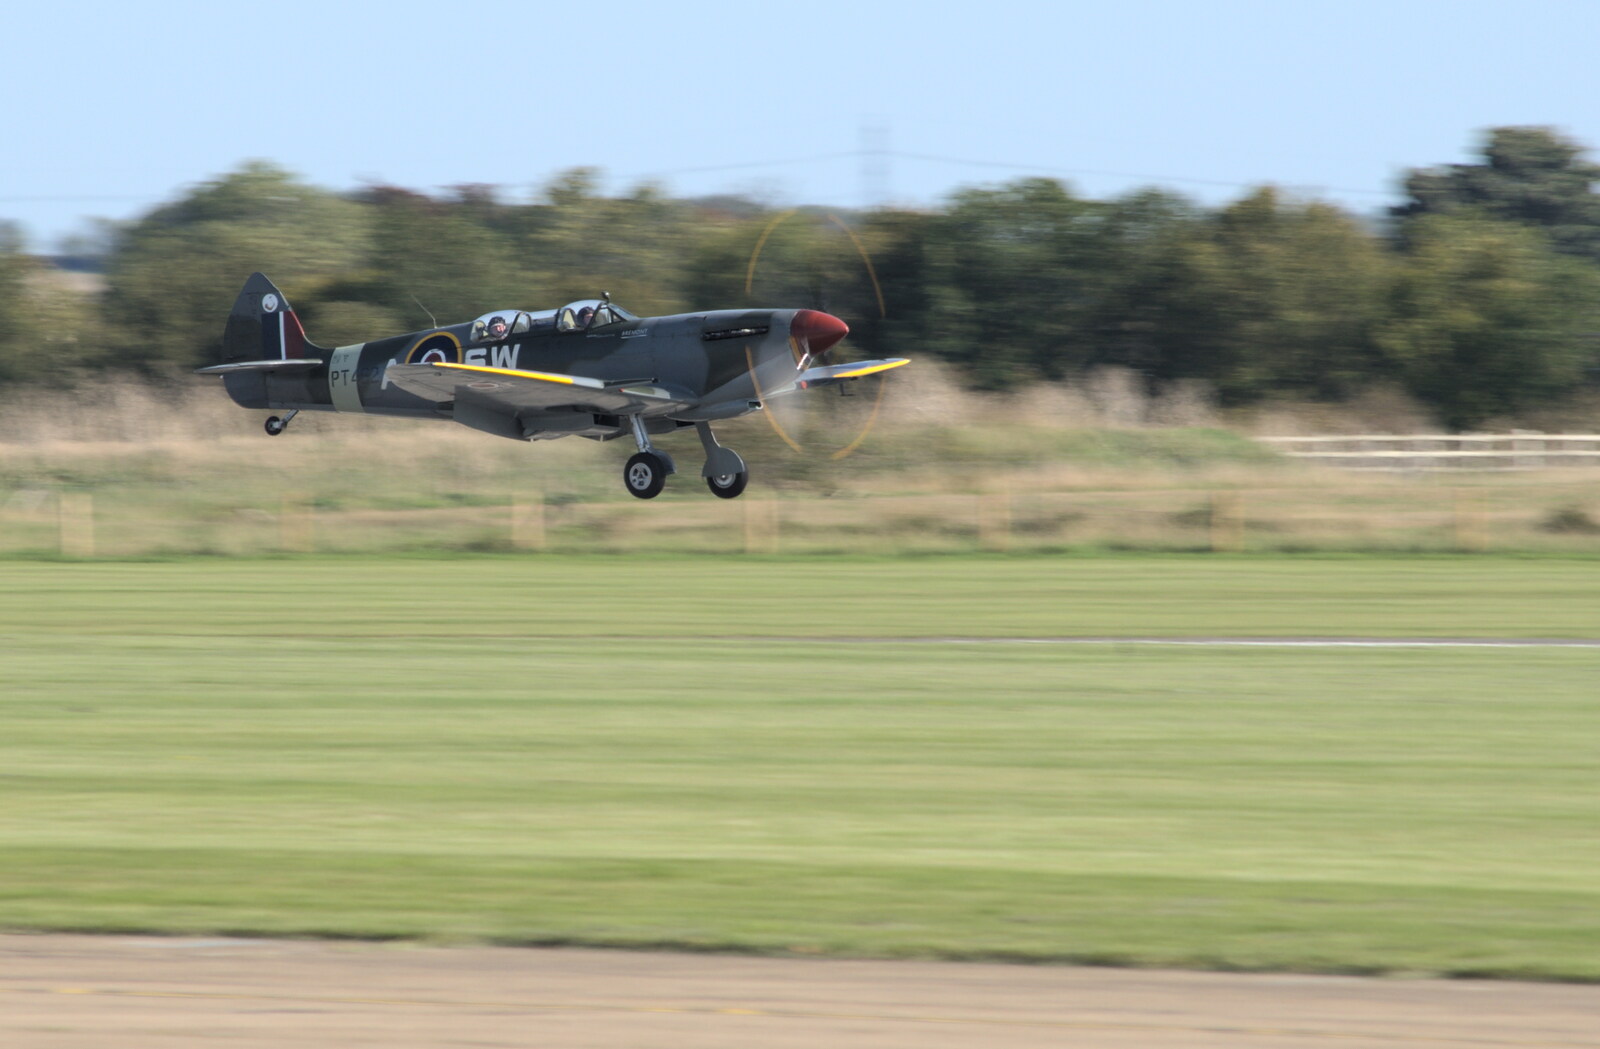 Spitfire PT462 comes in to land at Duxford from The Duxford Dash, IWM Duxford, Cambridge - 13th September 2020